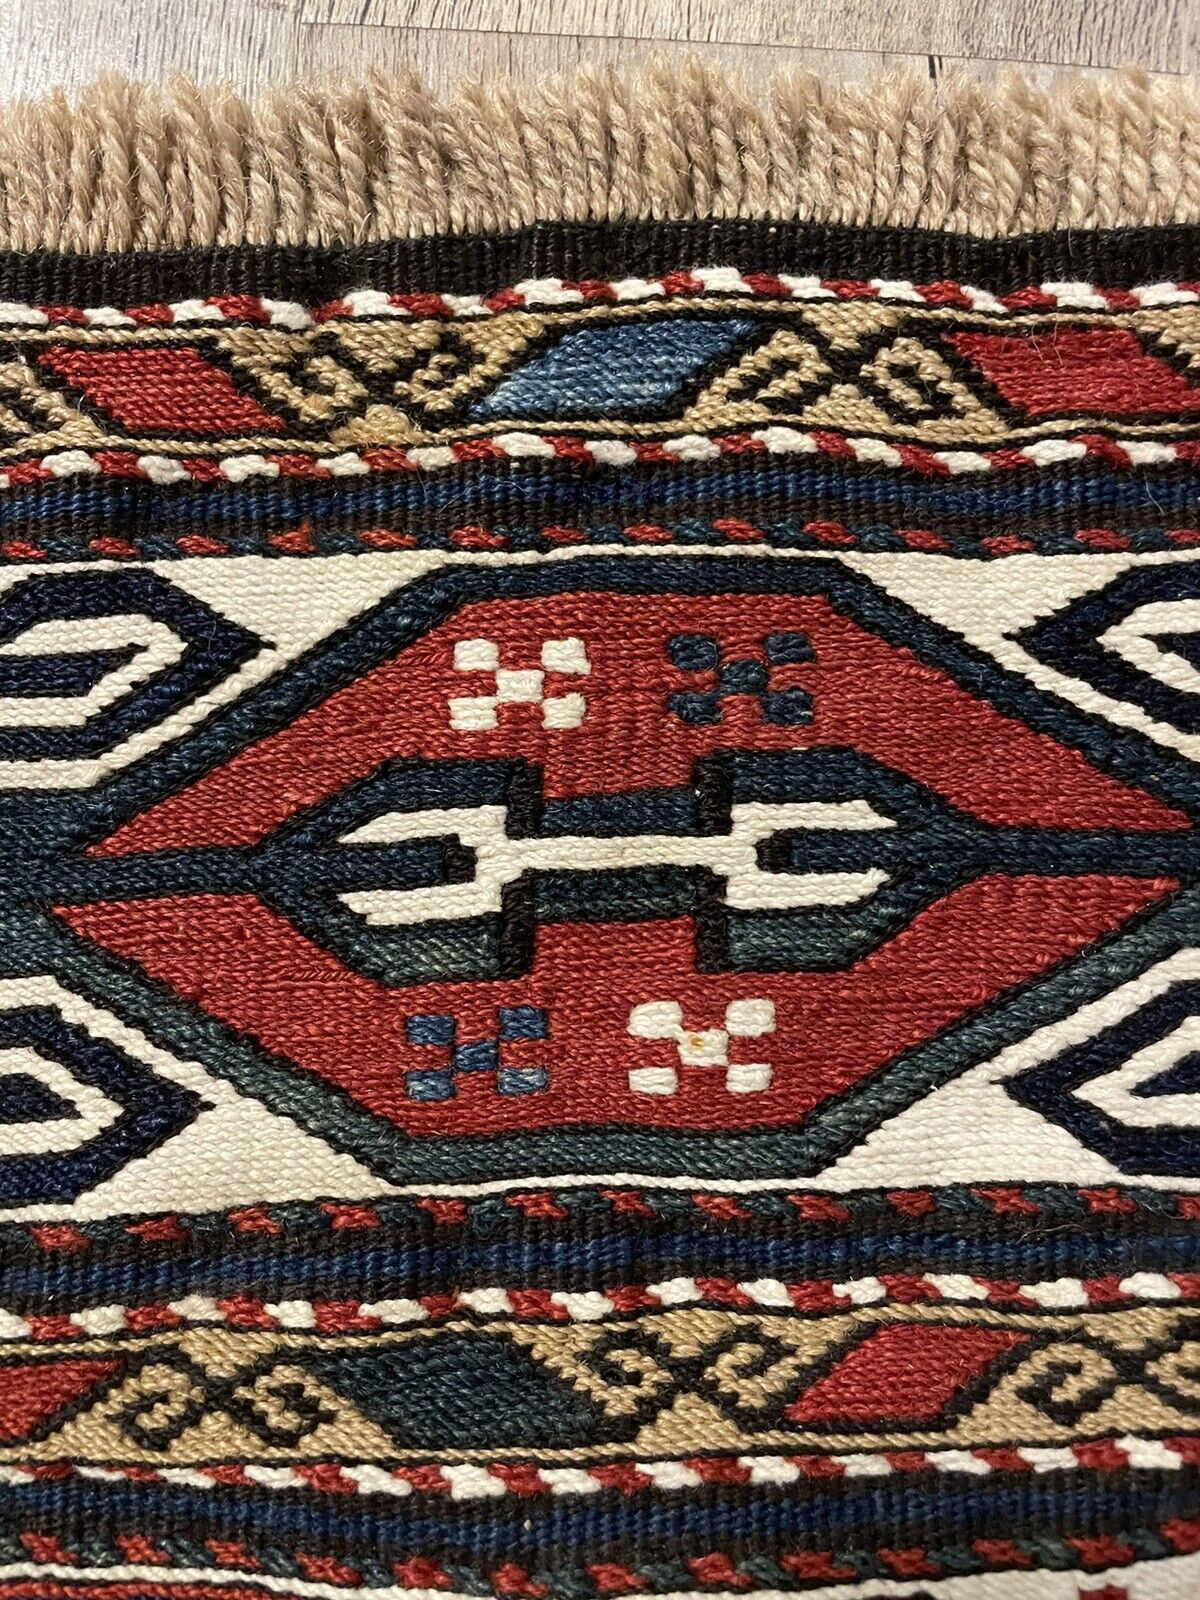 Close-up of collectible quality on Handmade Antique Persian Sumak Collectible Kilim - Detailed view highlighting the collectible quality of the kilim as a unique piece of history.